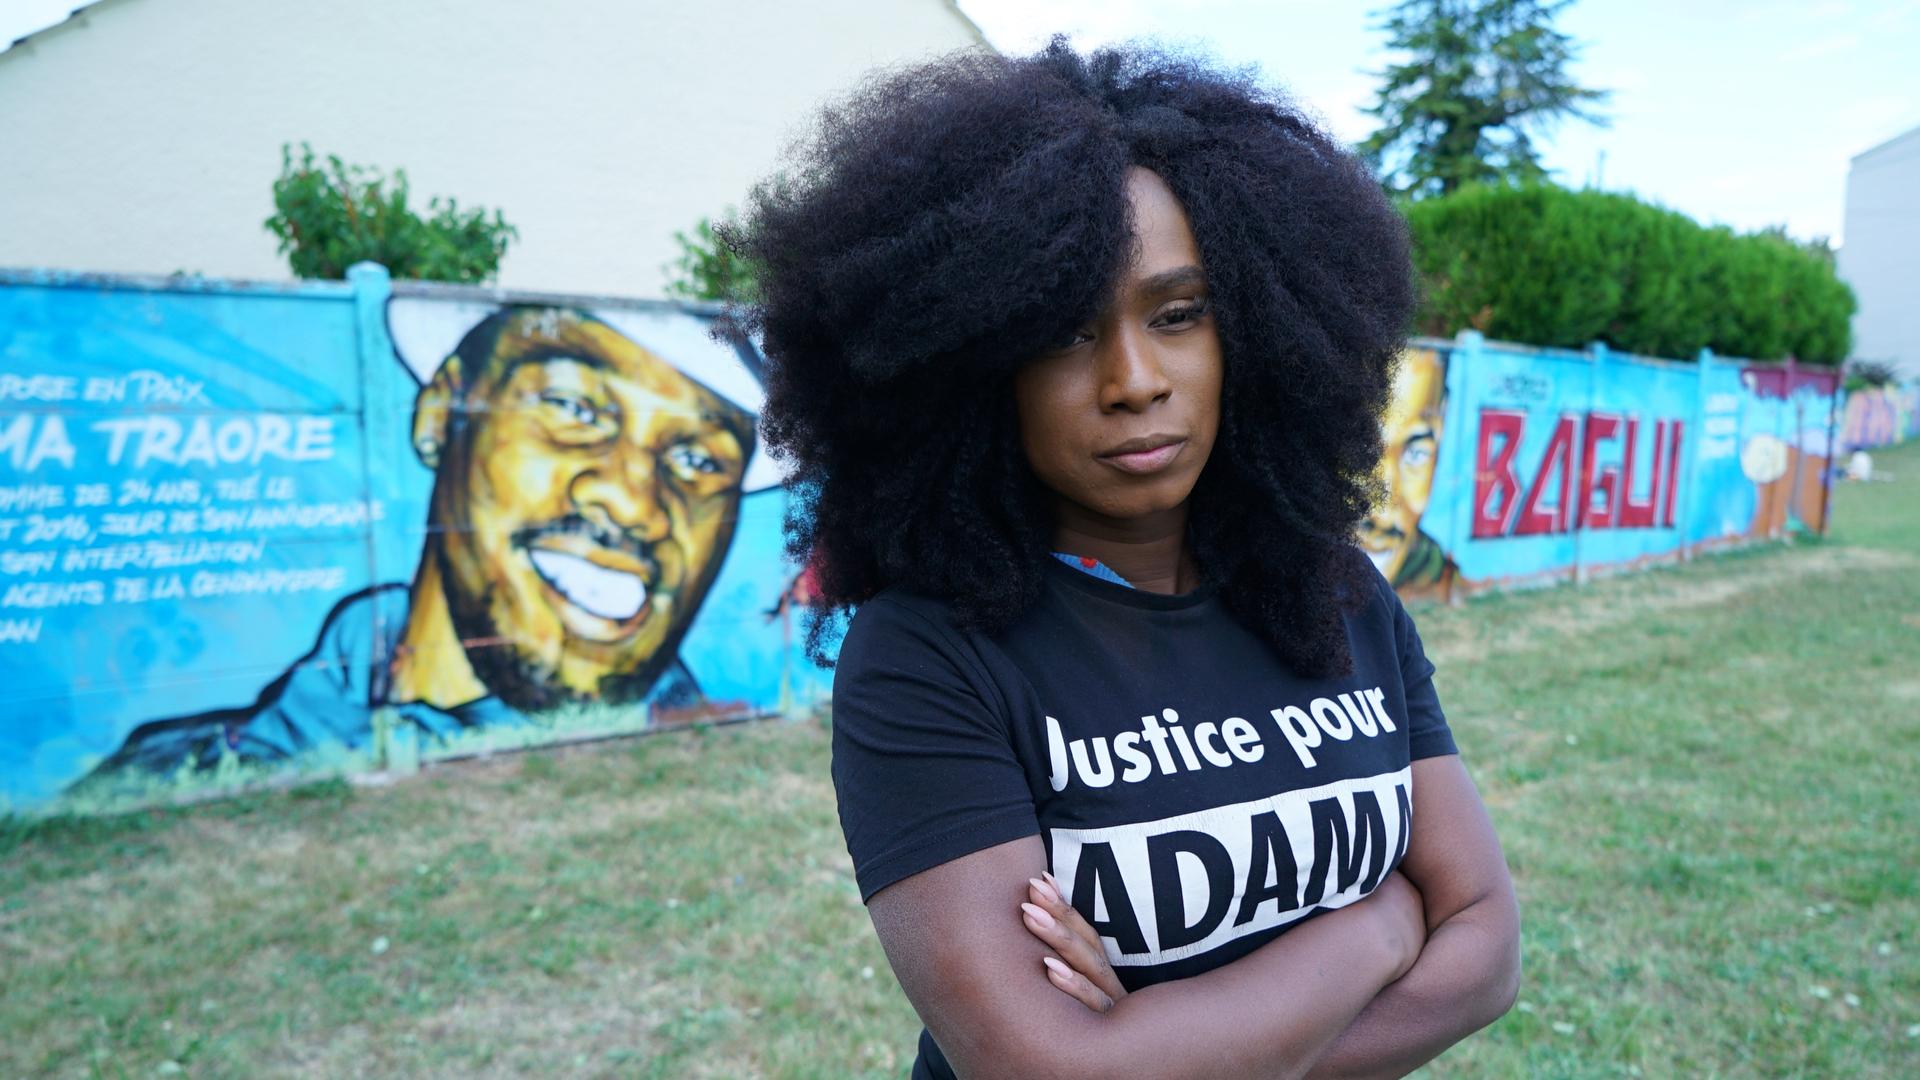 A black woman wearing a black shirt with white lettering poses near a mural